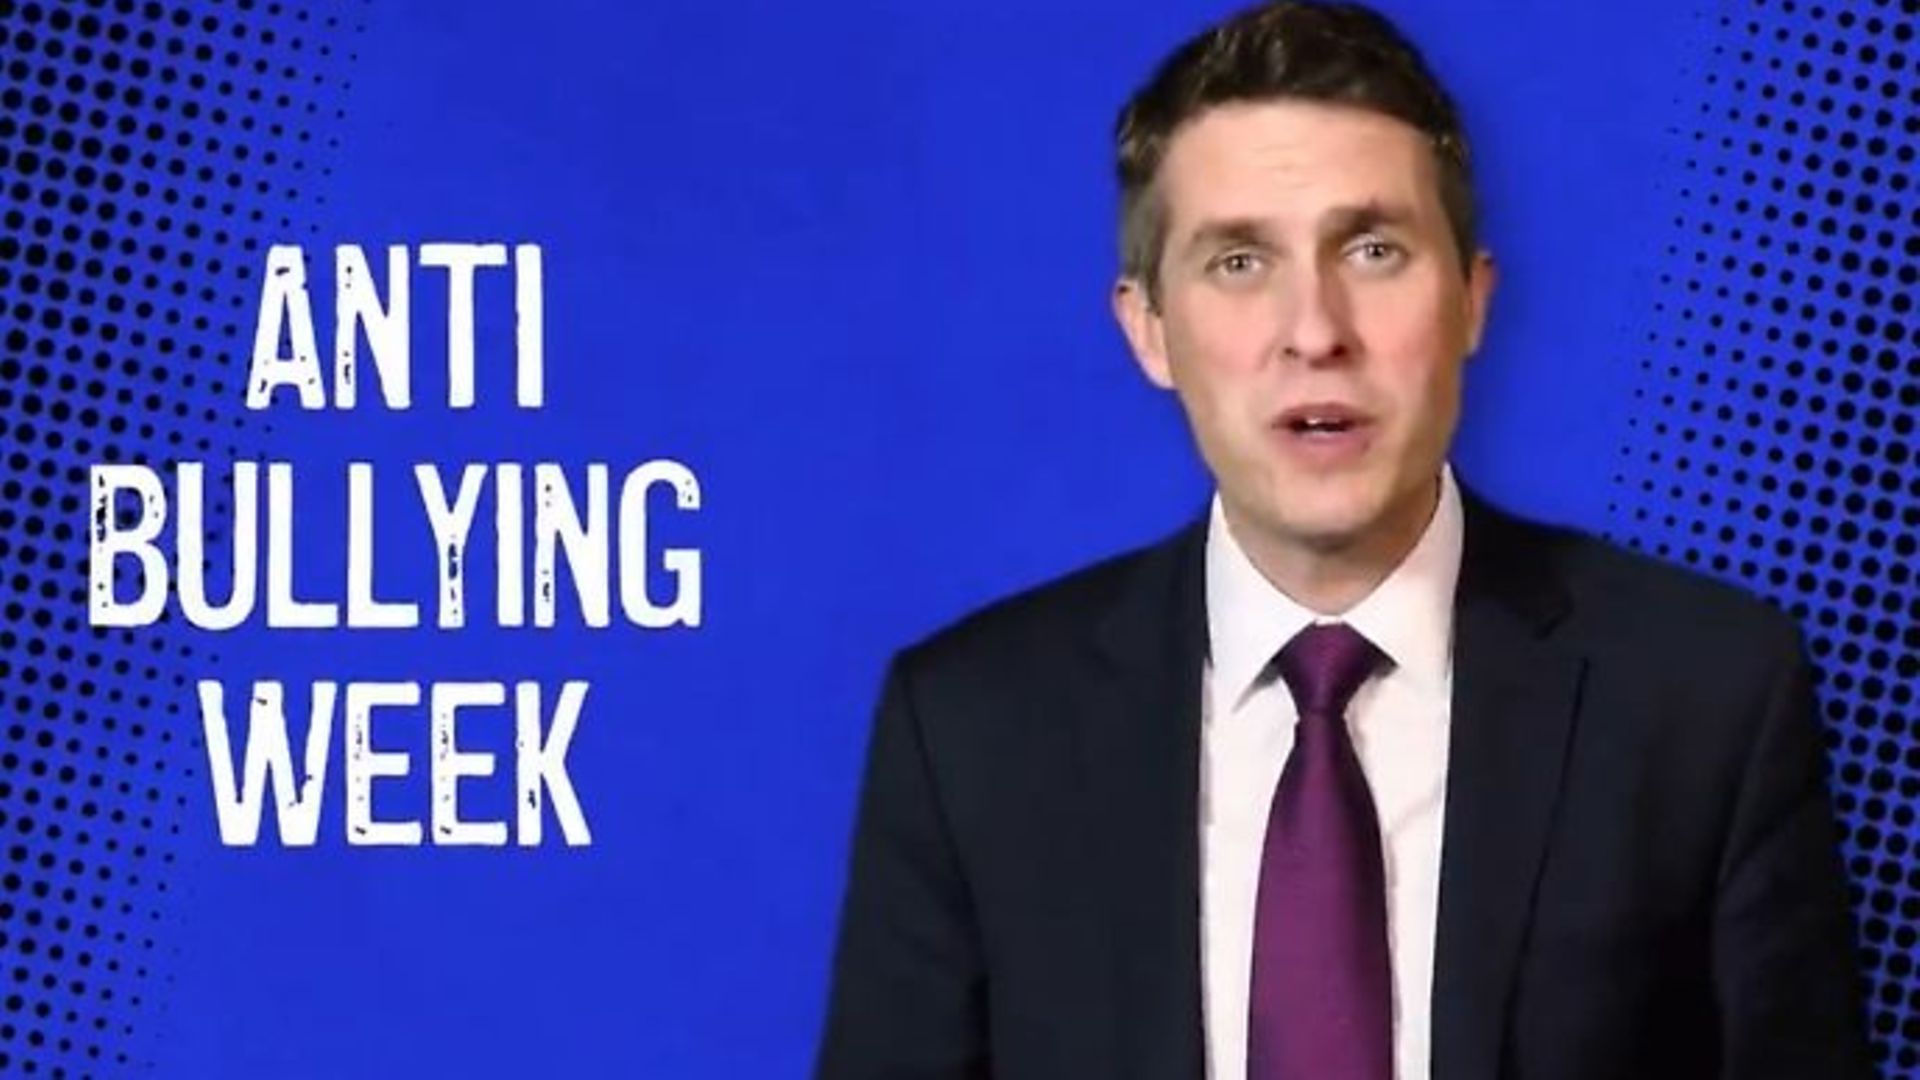 Education secretary Gavin Williamson in a promotional video against bullying - Credit: Twitter